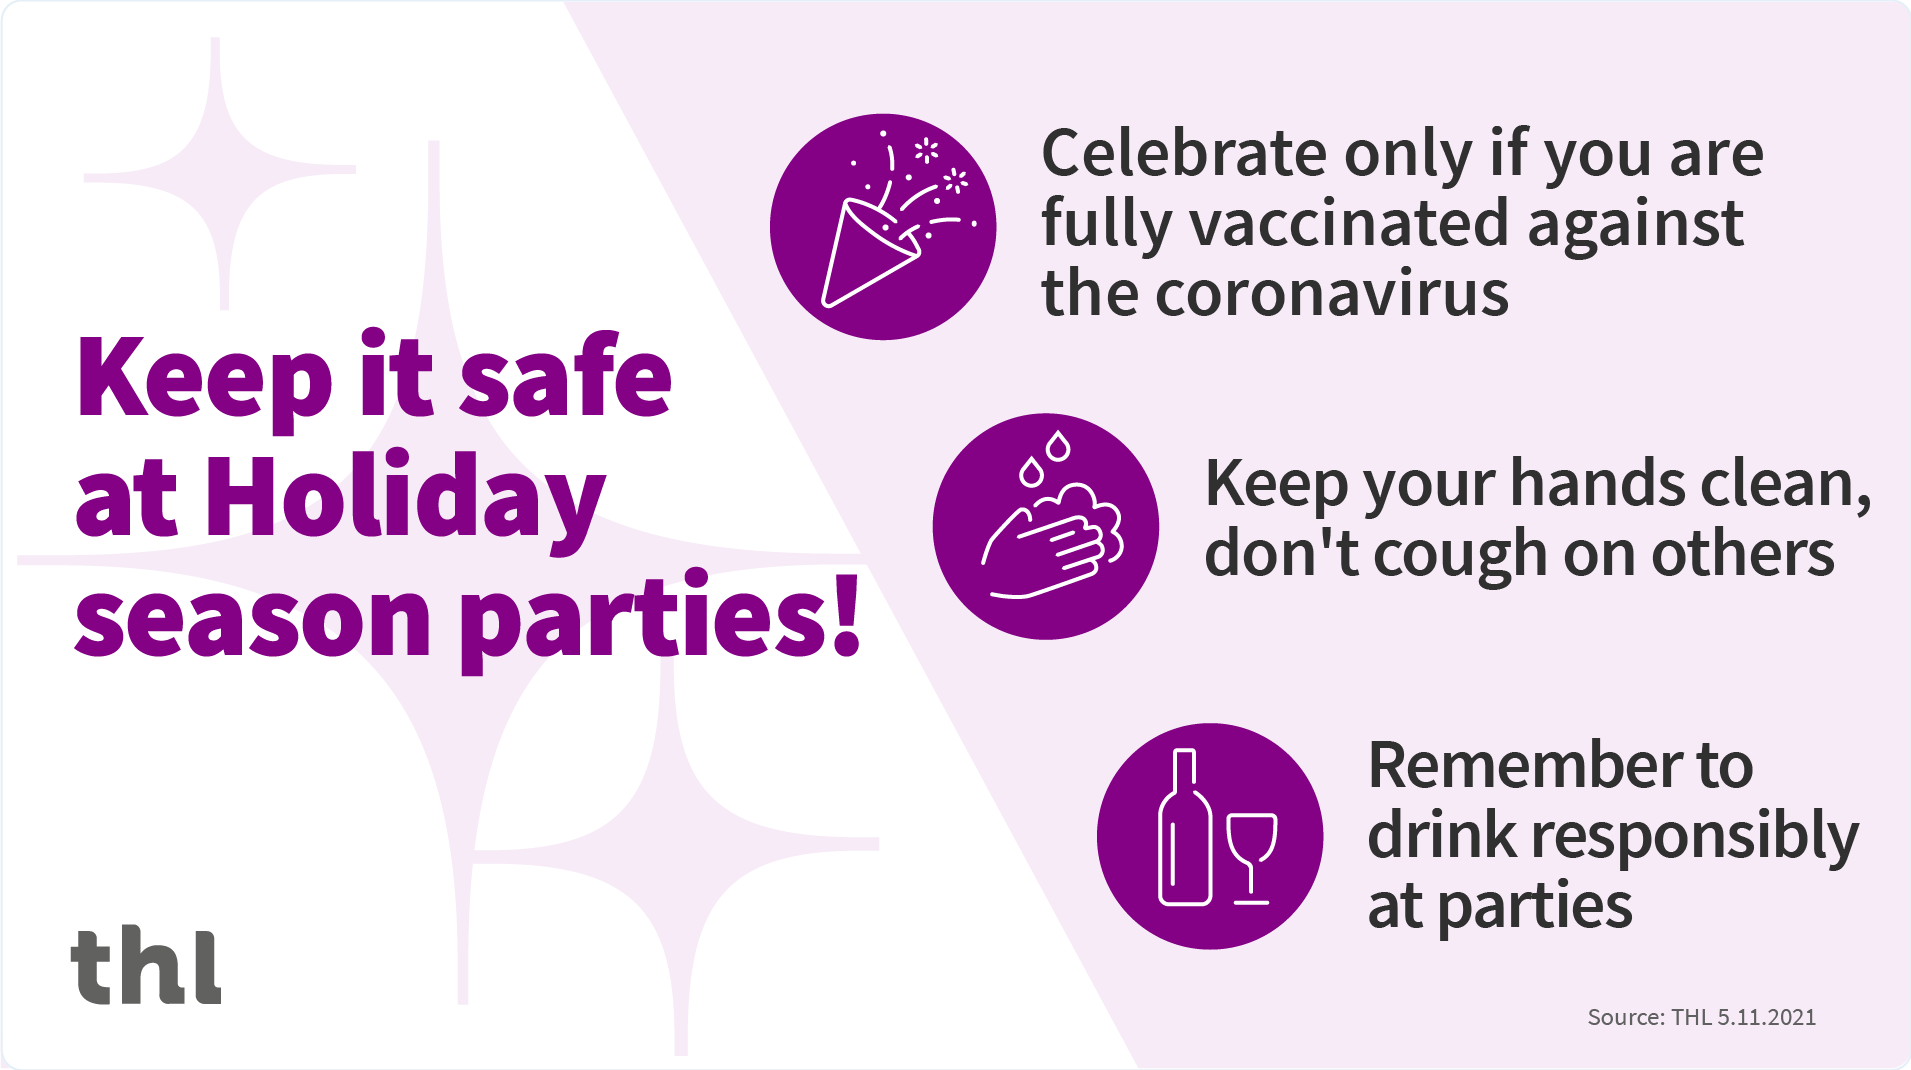 Keep it safe at Holday season parties by getting vaccinated, keeping your hands clean, not coughing on others and drinking responsibly.  